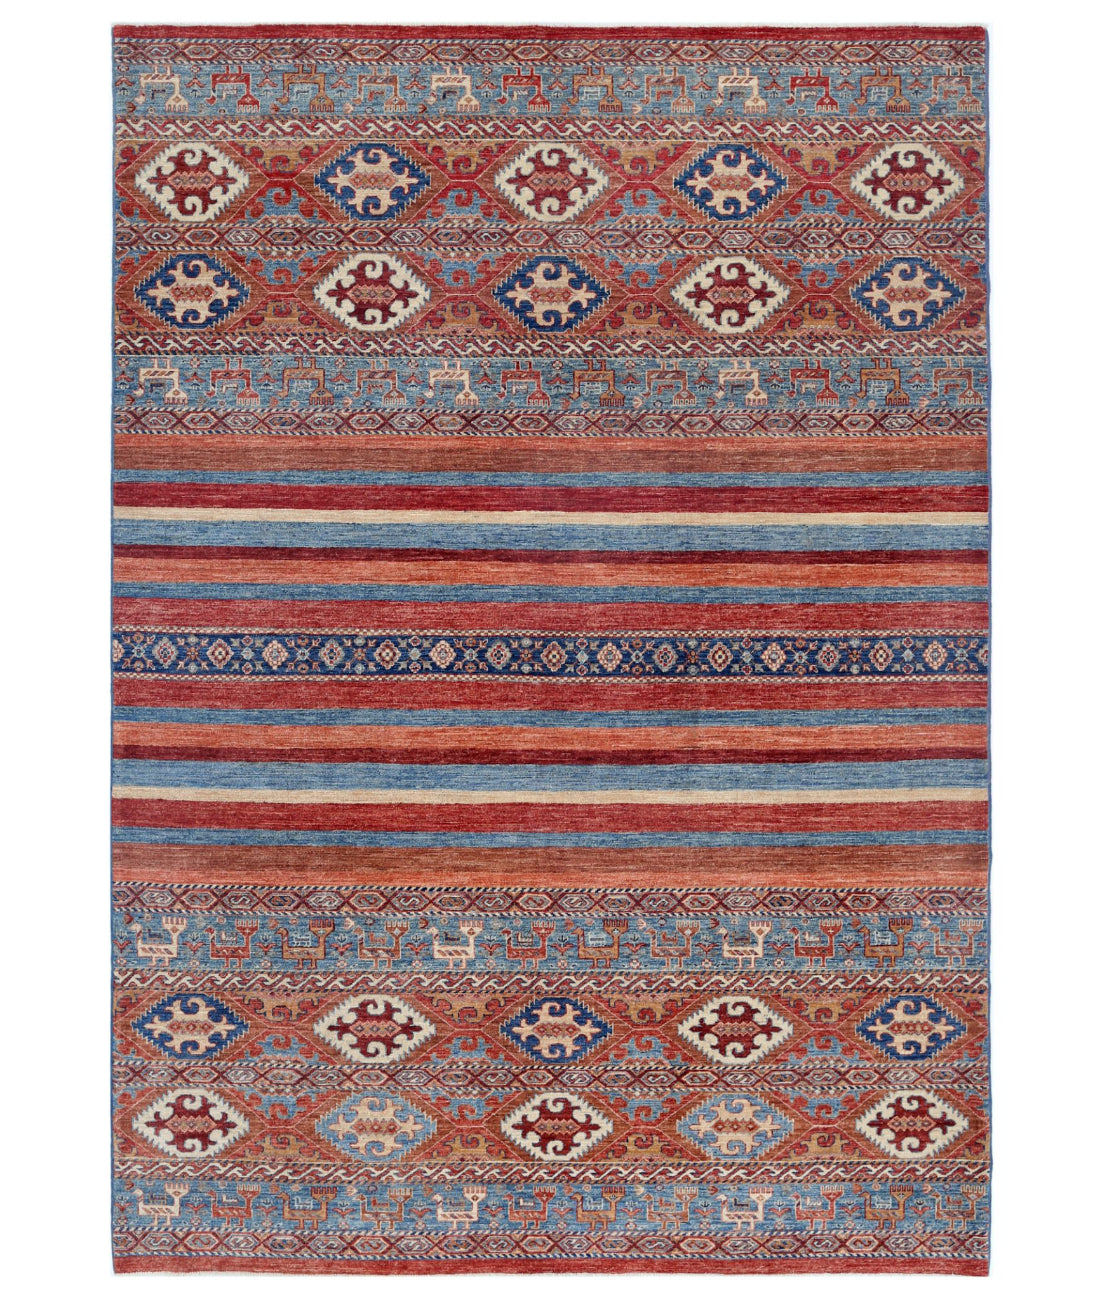 Hand Knotted Khurjeen Wool Rug - 6'9'' x 9'8'' 6'9'' x 9'8'' (203 X 290) / Multi / Multi